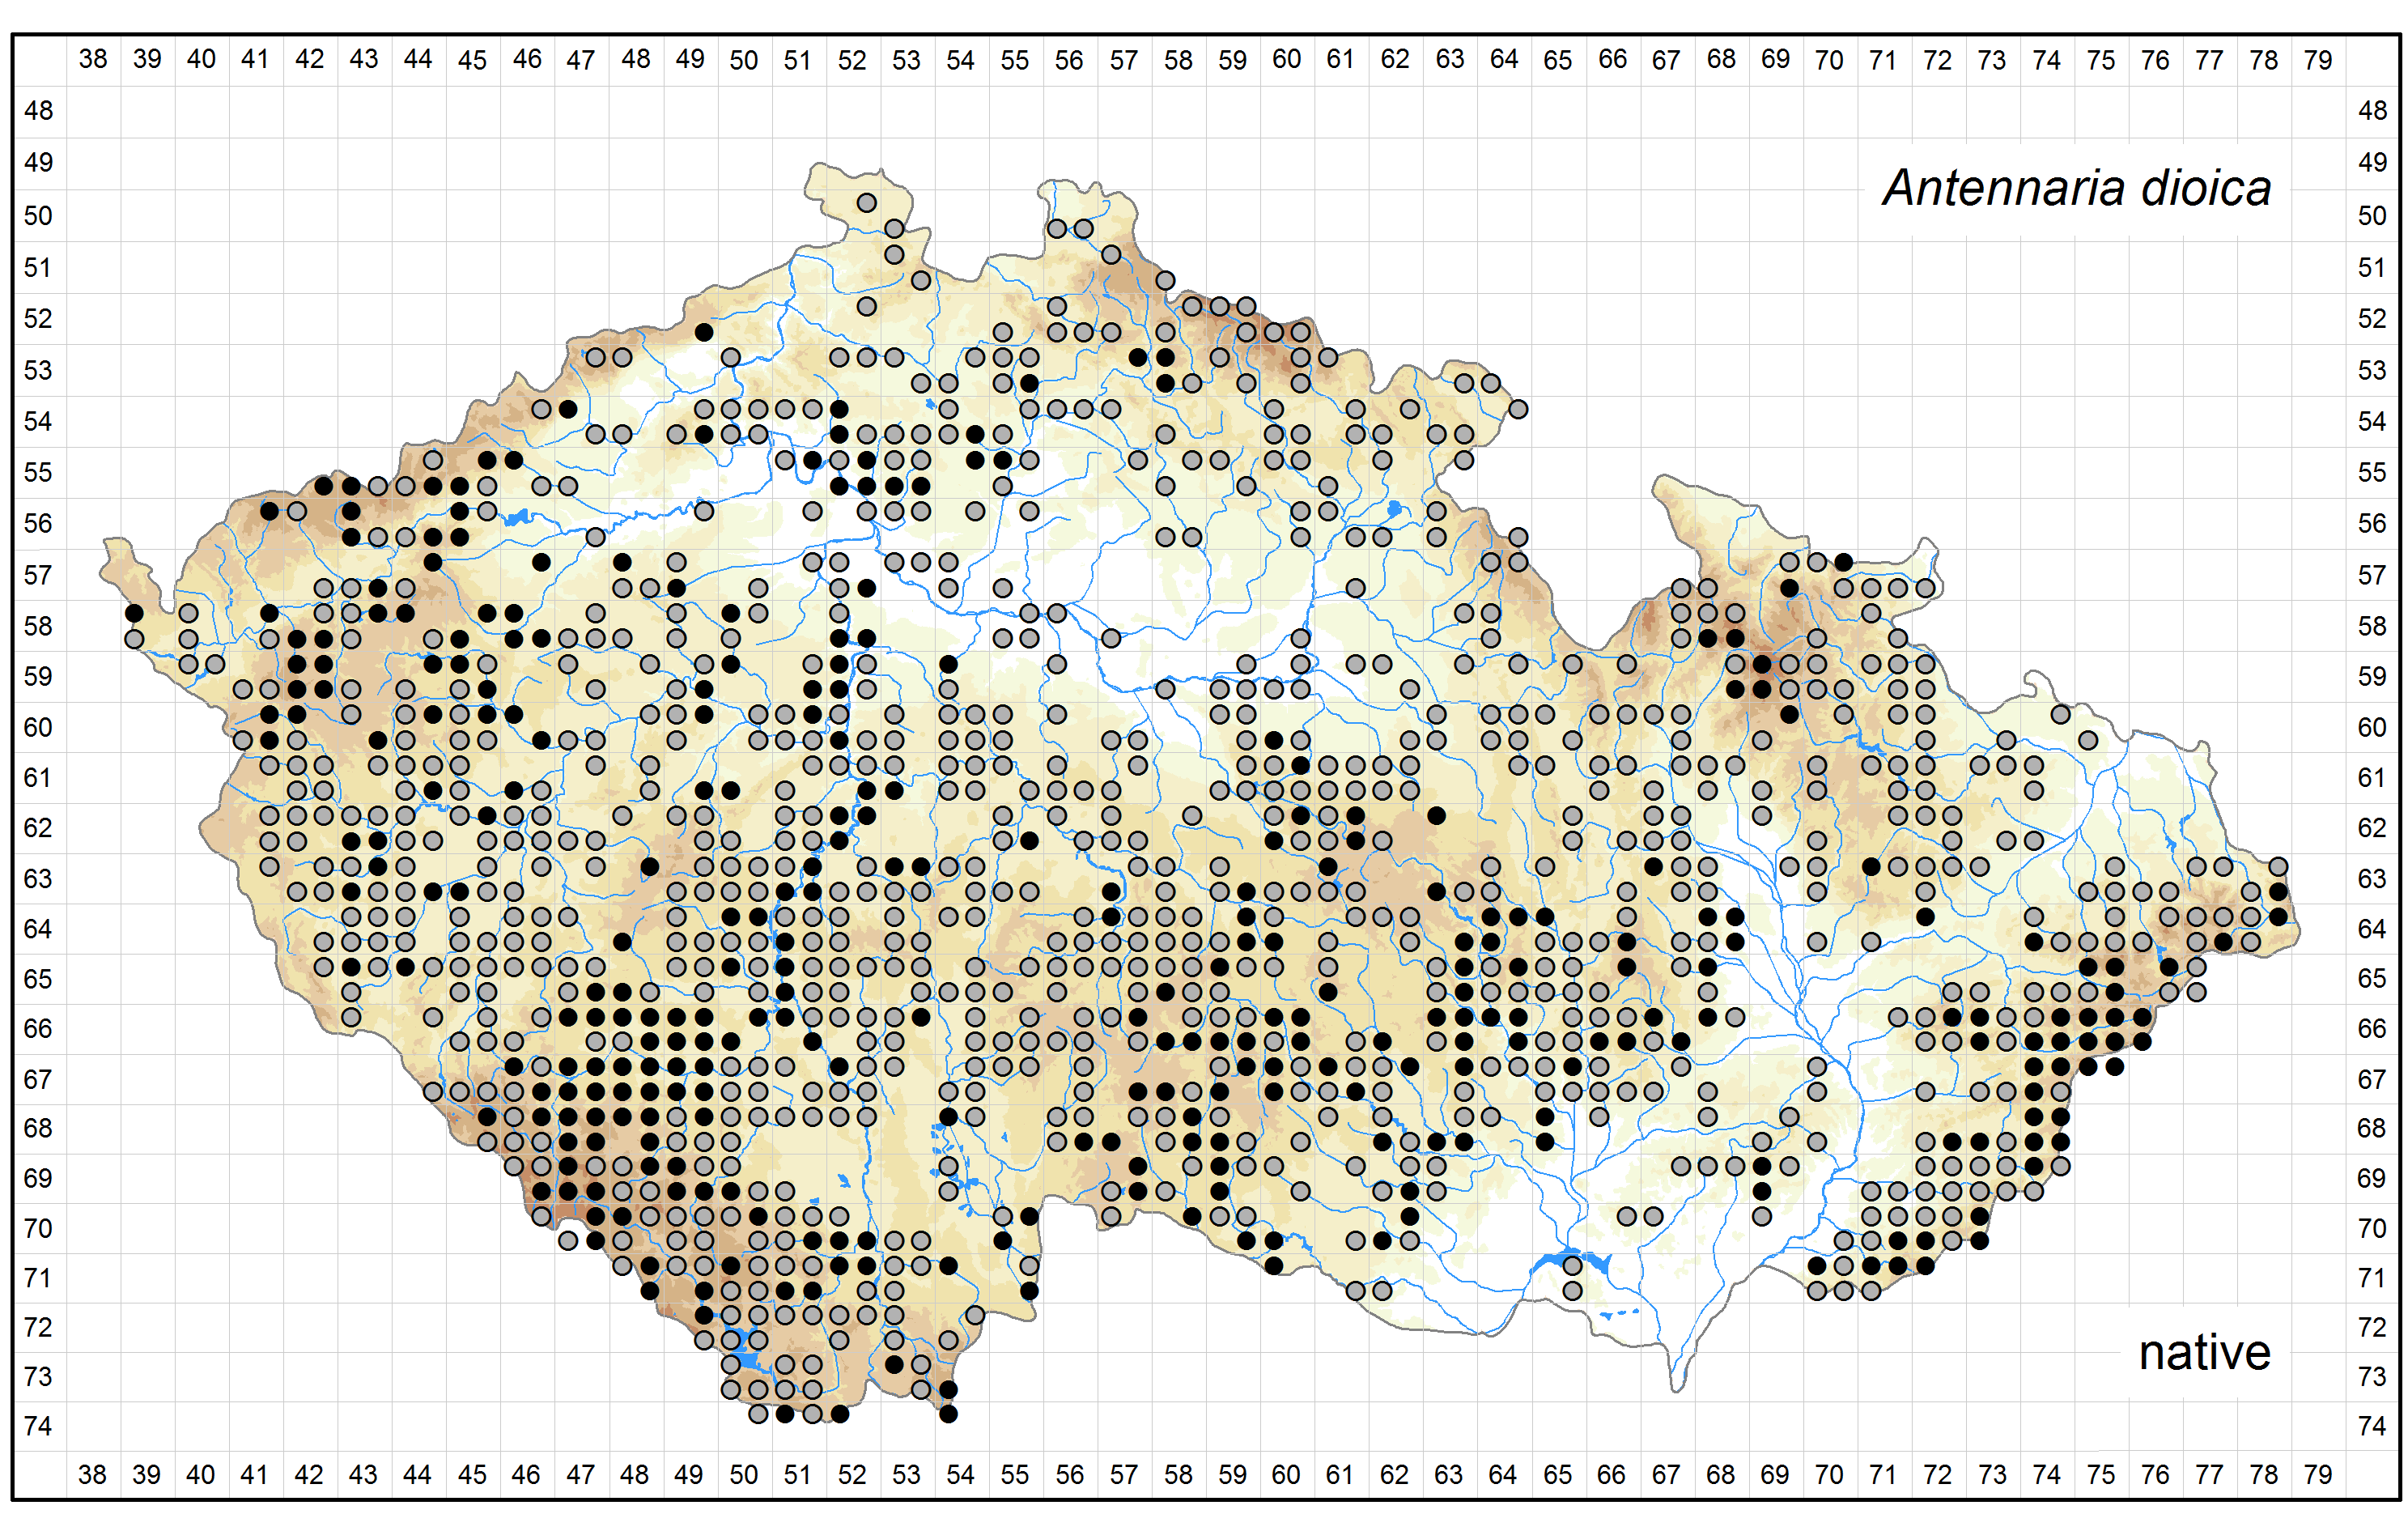 Distribution of Antennaria dioica in the Czech Republic Author of the map: Jitka Štěpánková Map produced on: 13-05-2016 Database records used for producing the distribution map of Antennaria dioica